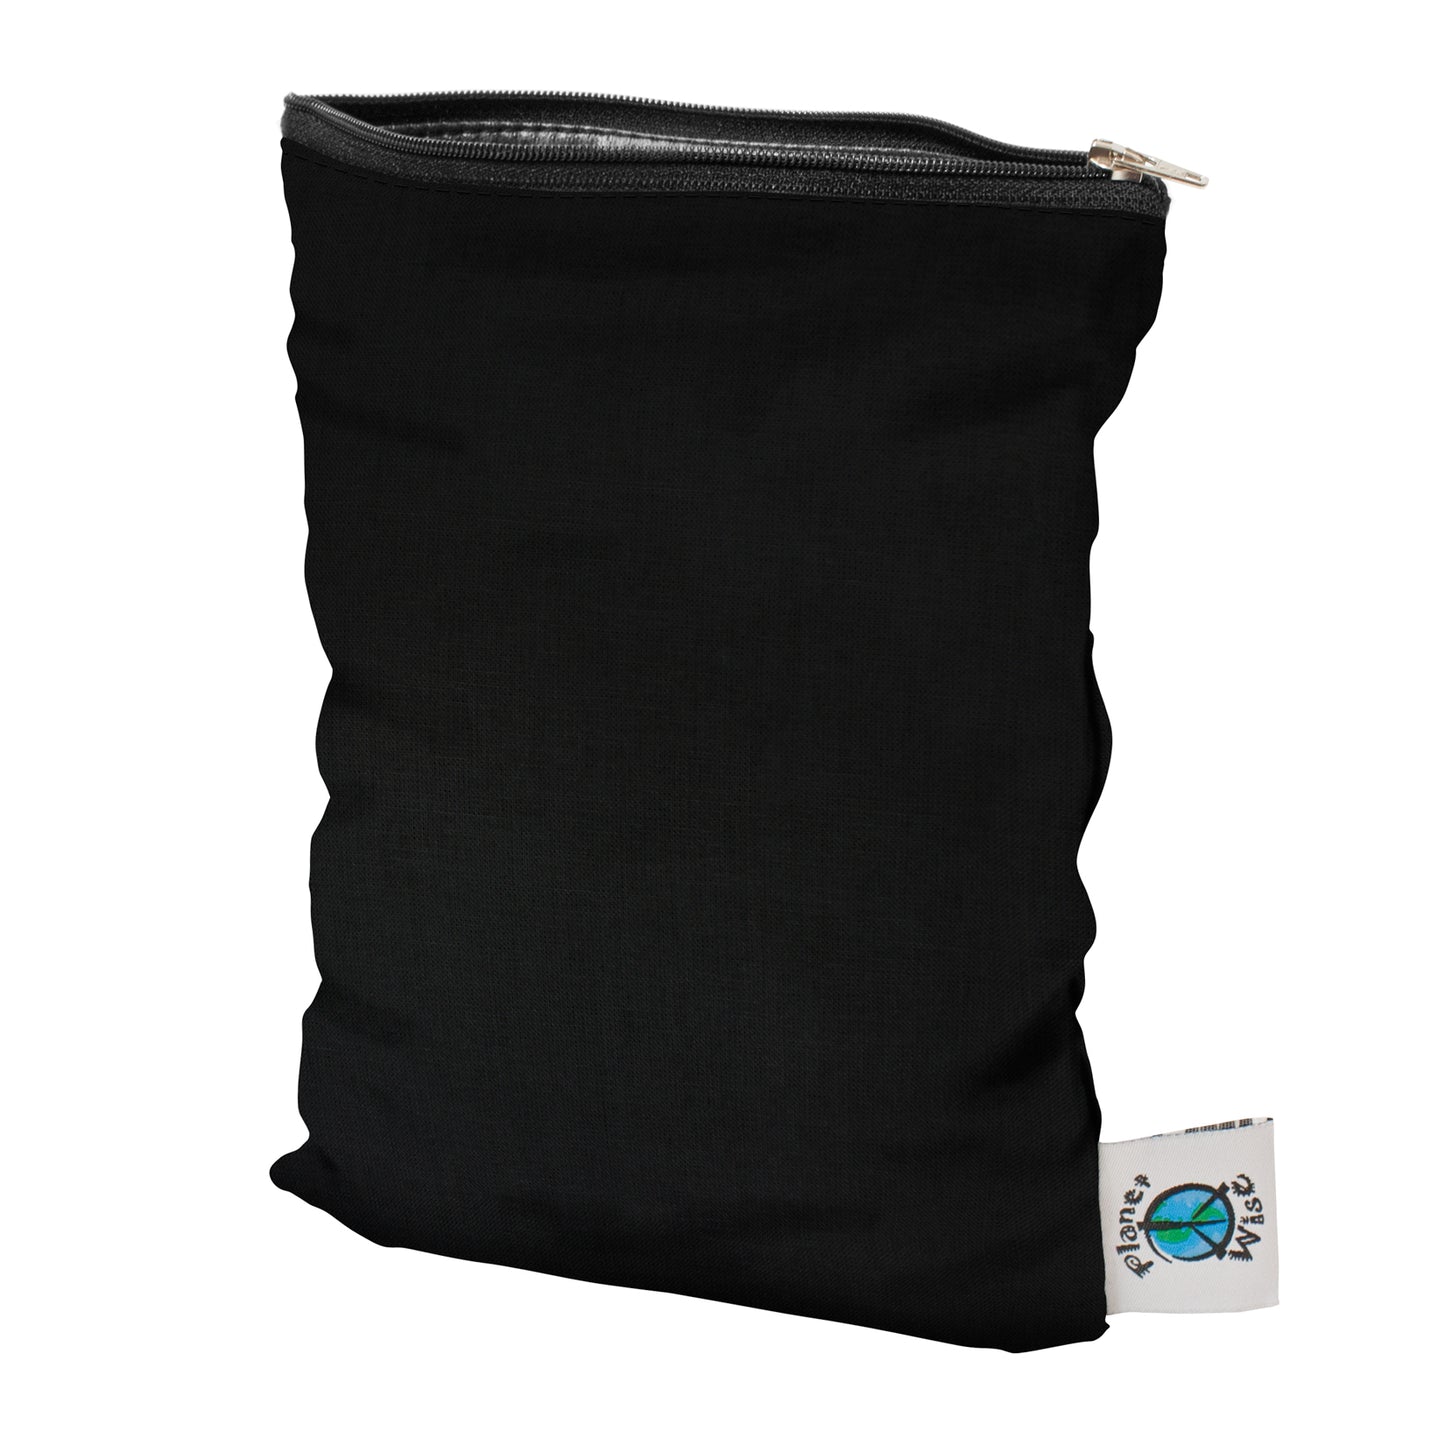 Planet Wise Wet Bag - Small 7.5" x 10"